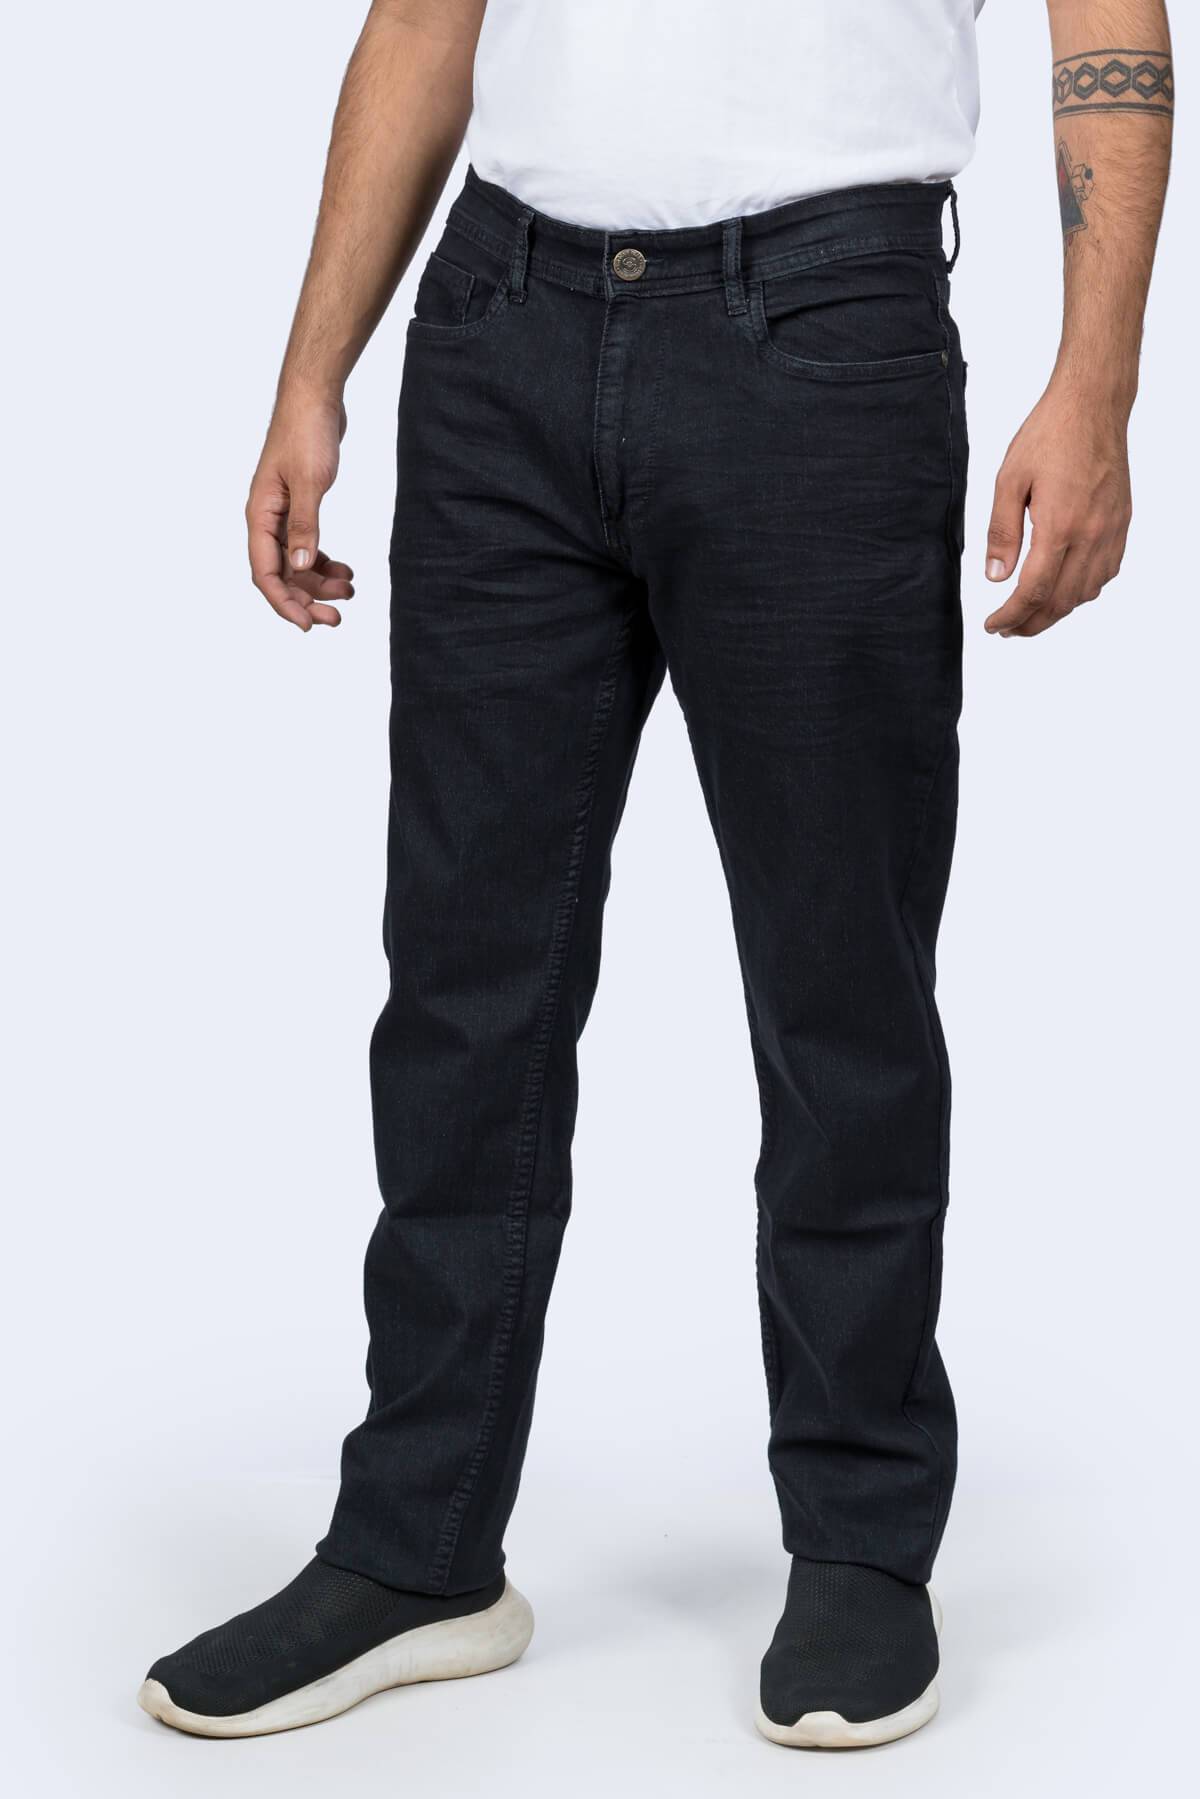 Slim Fit Stretchable Cotton Jeans in Mumbai at best price by White Negro  Fabrication - Justdial